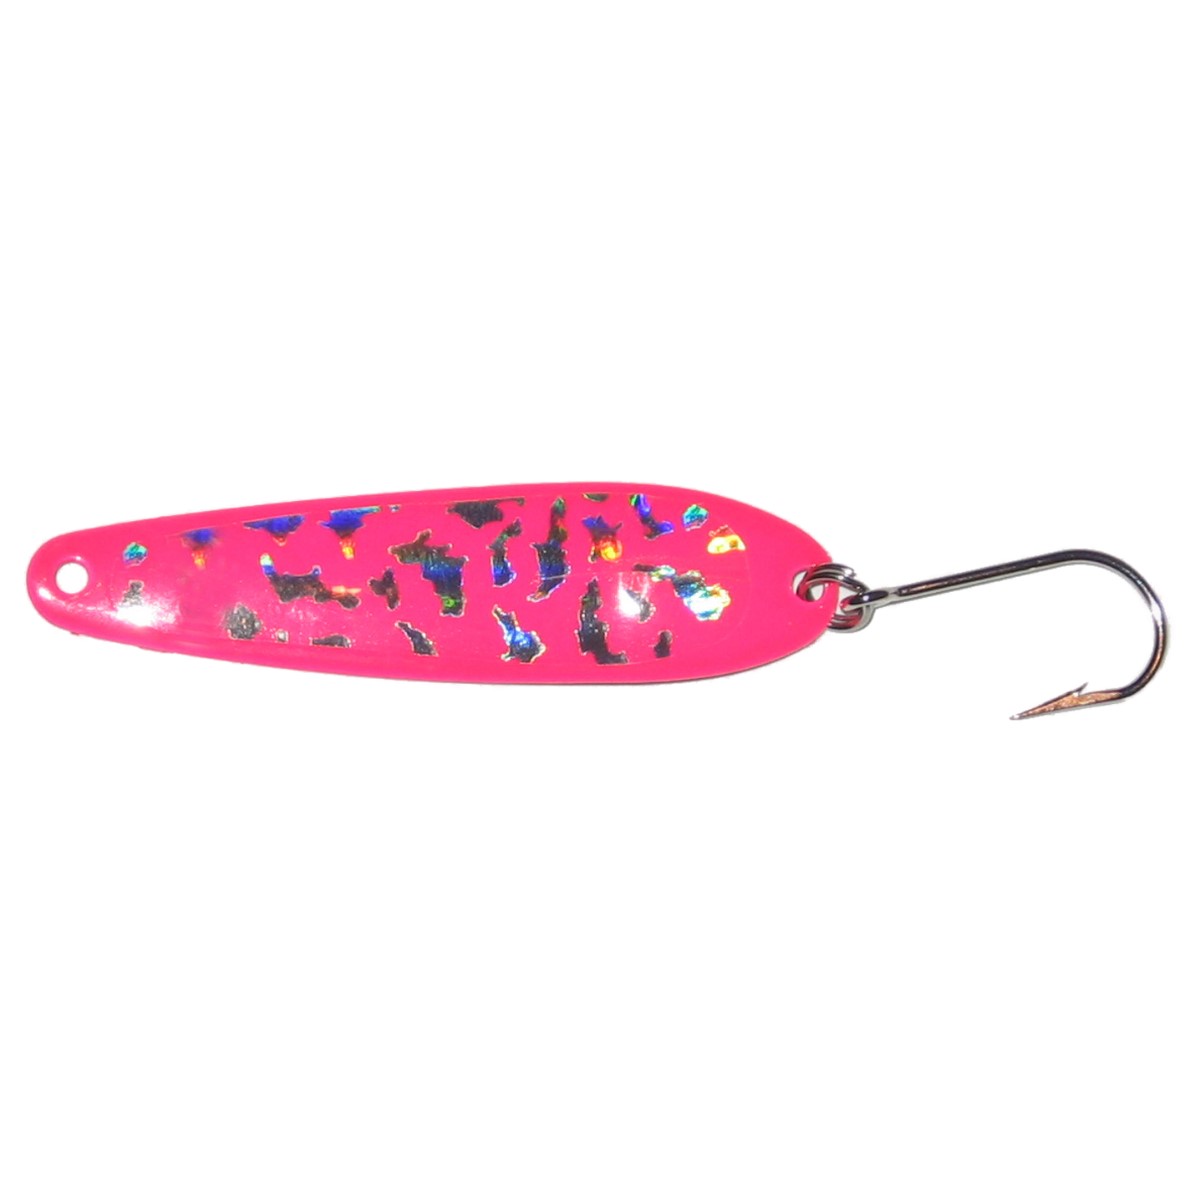 Rocky Mountain Tackle Viper Serpent Spoon